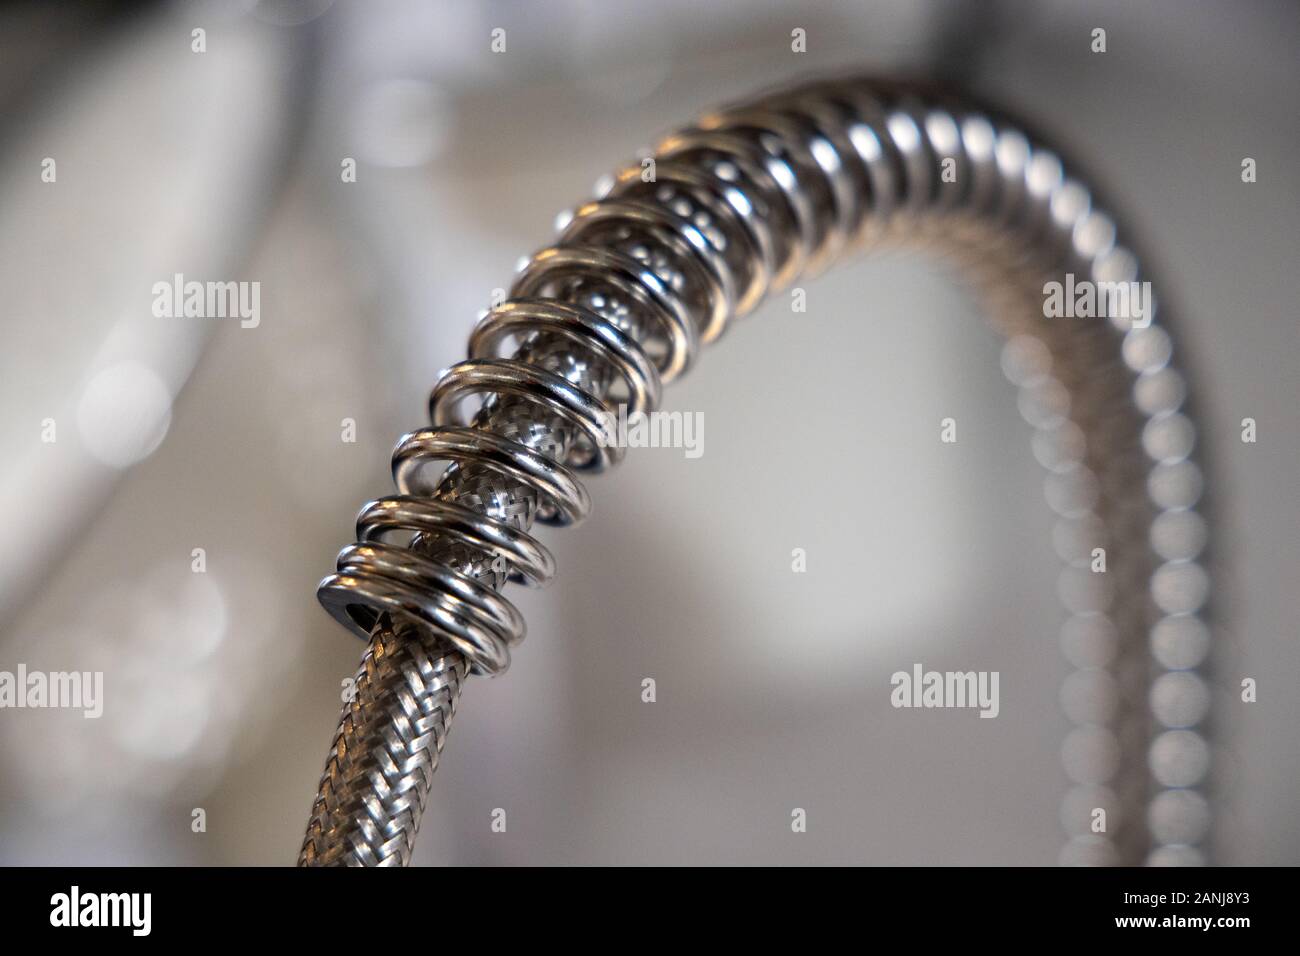 kitchen faucet, detail of metal coil spring. Domestic kitchen. Stock Photo